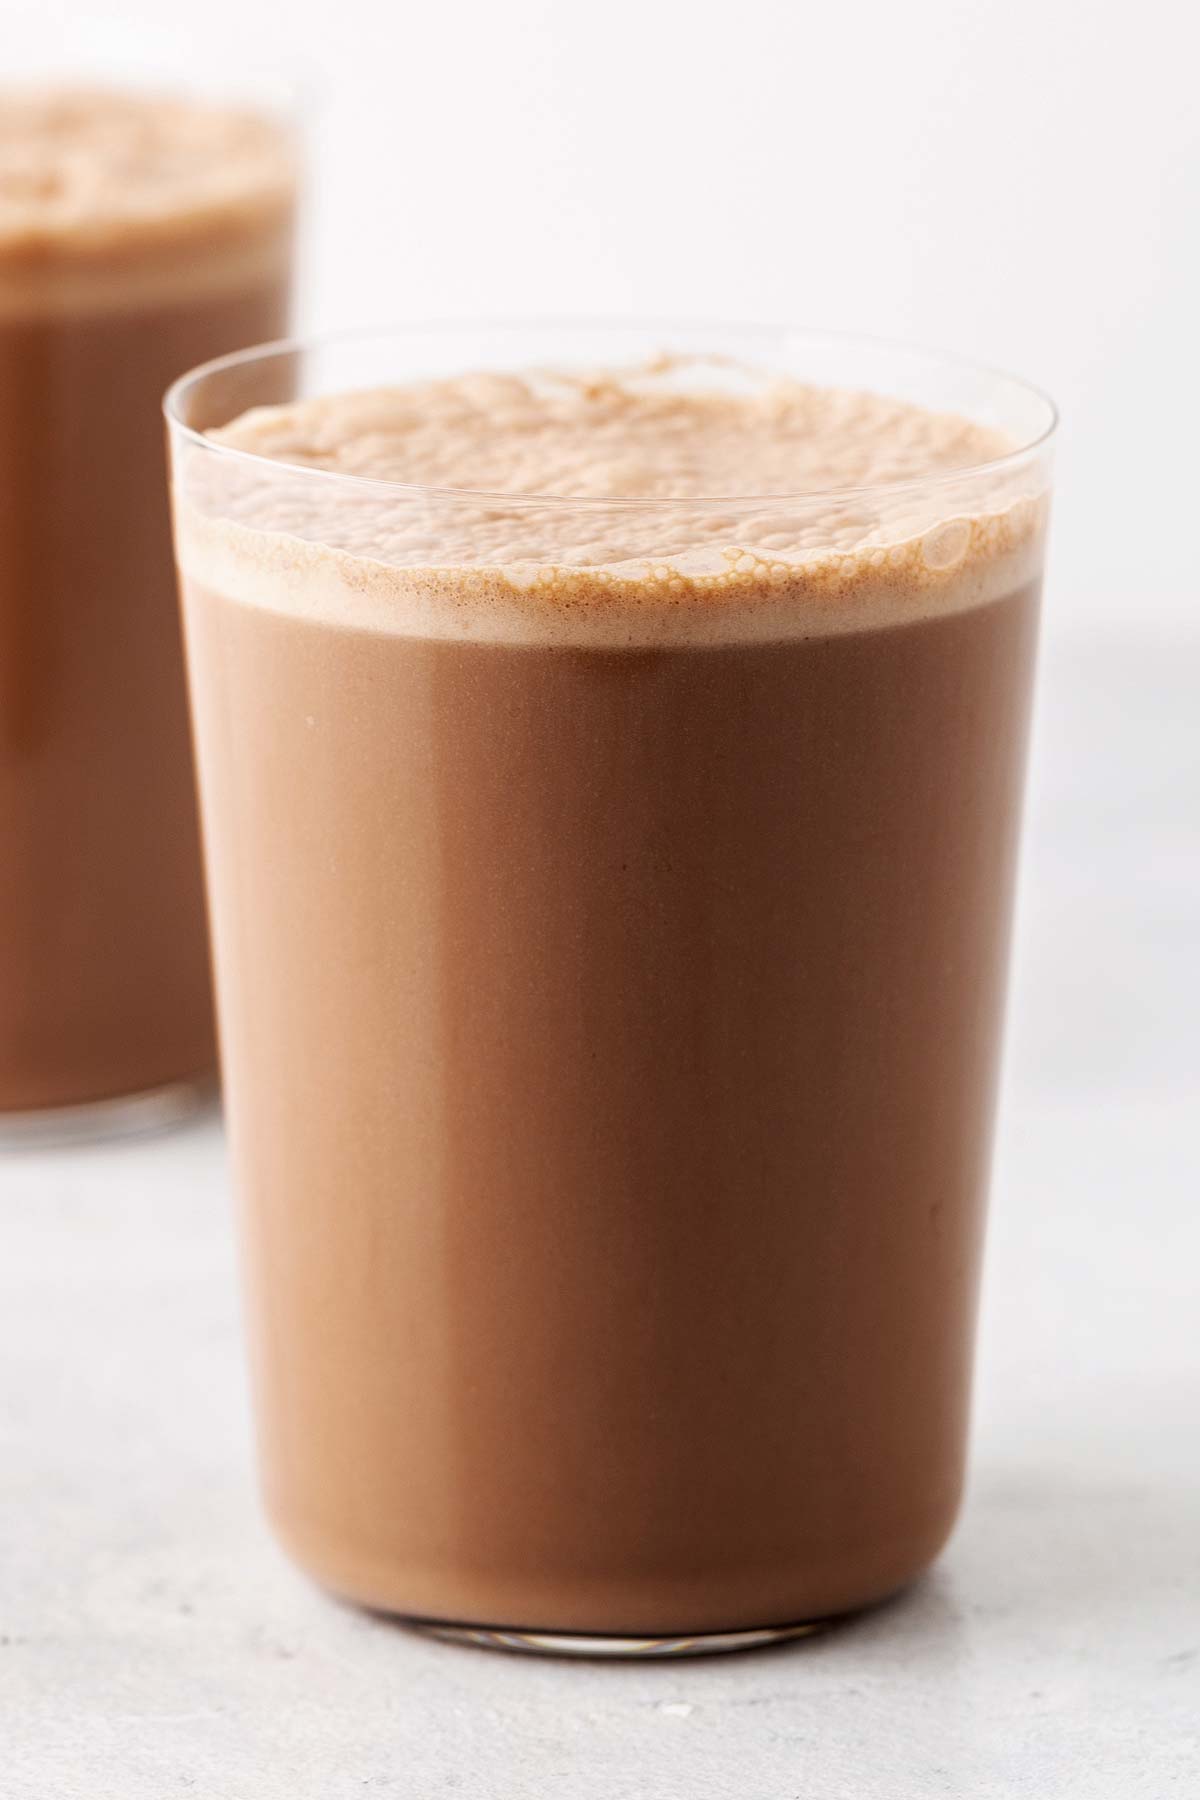 Chocolate protein shake in a glass.